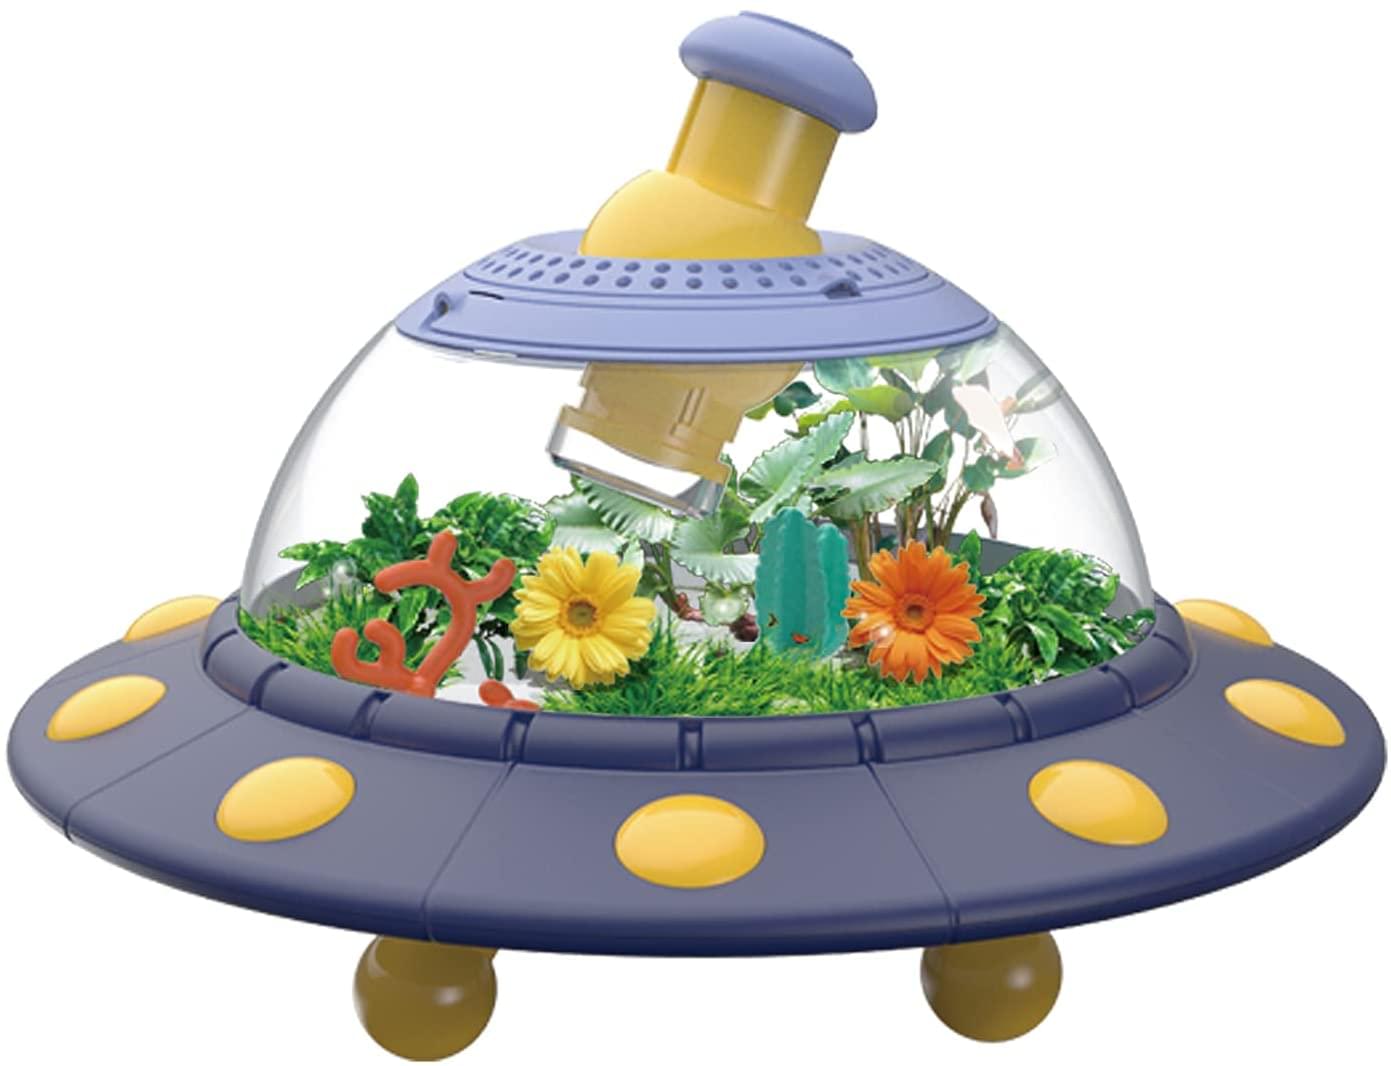 Curious Mind UFO Biosphere Educational Toy